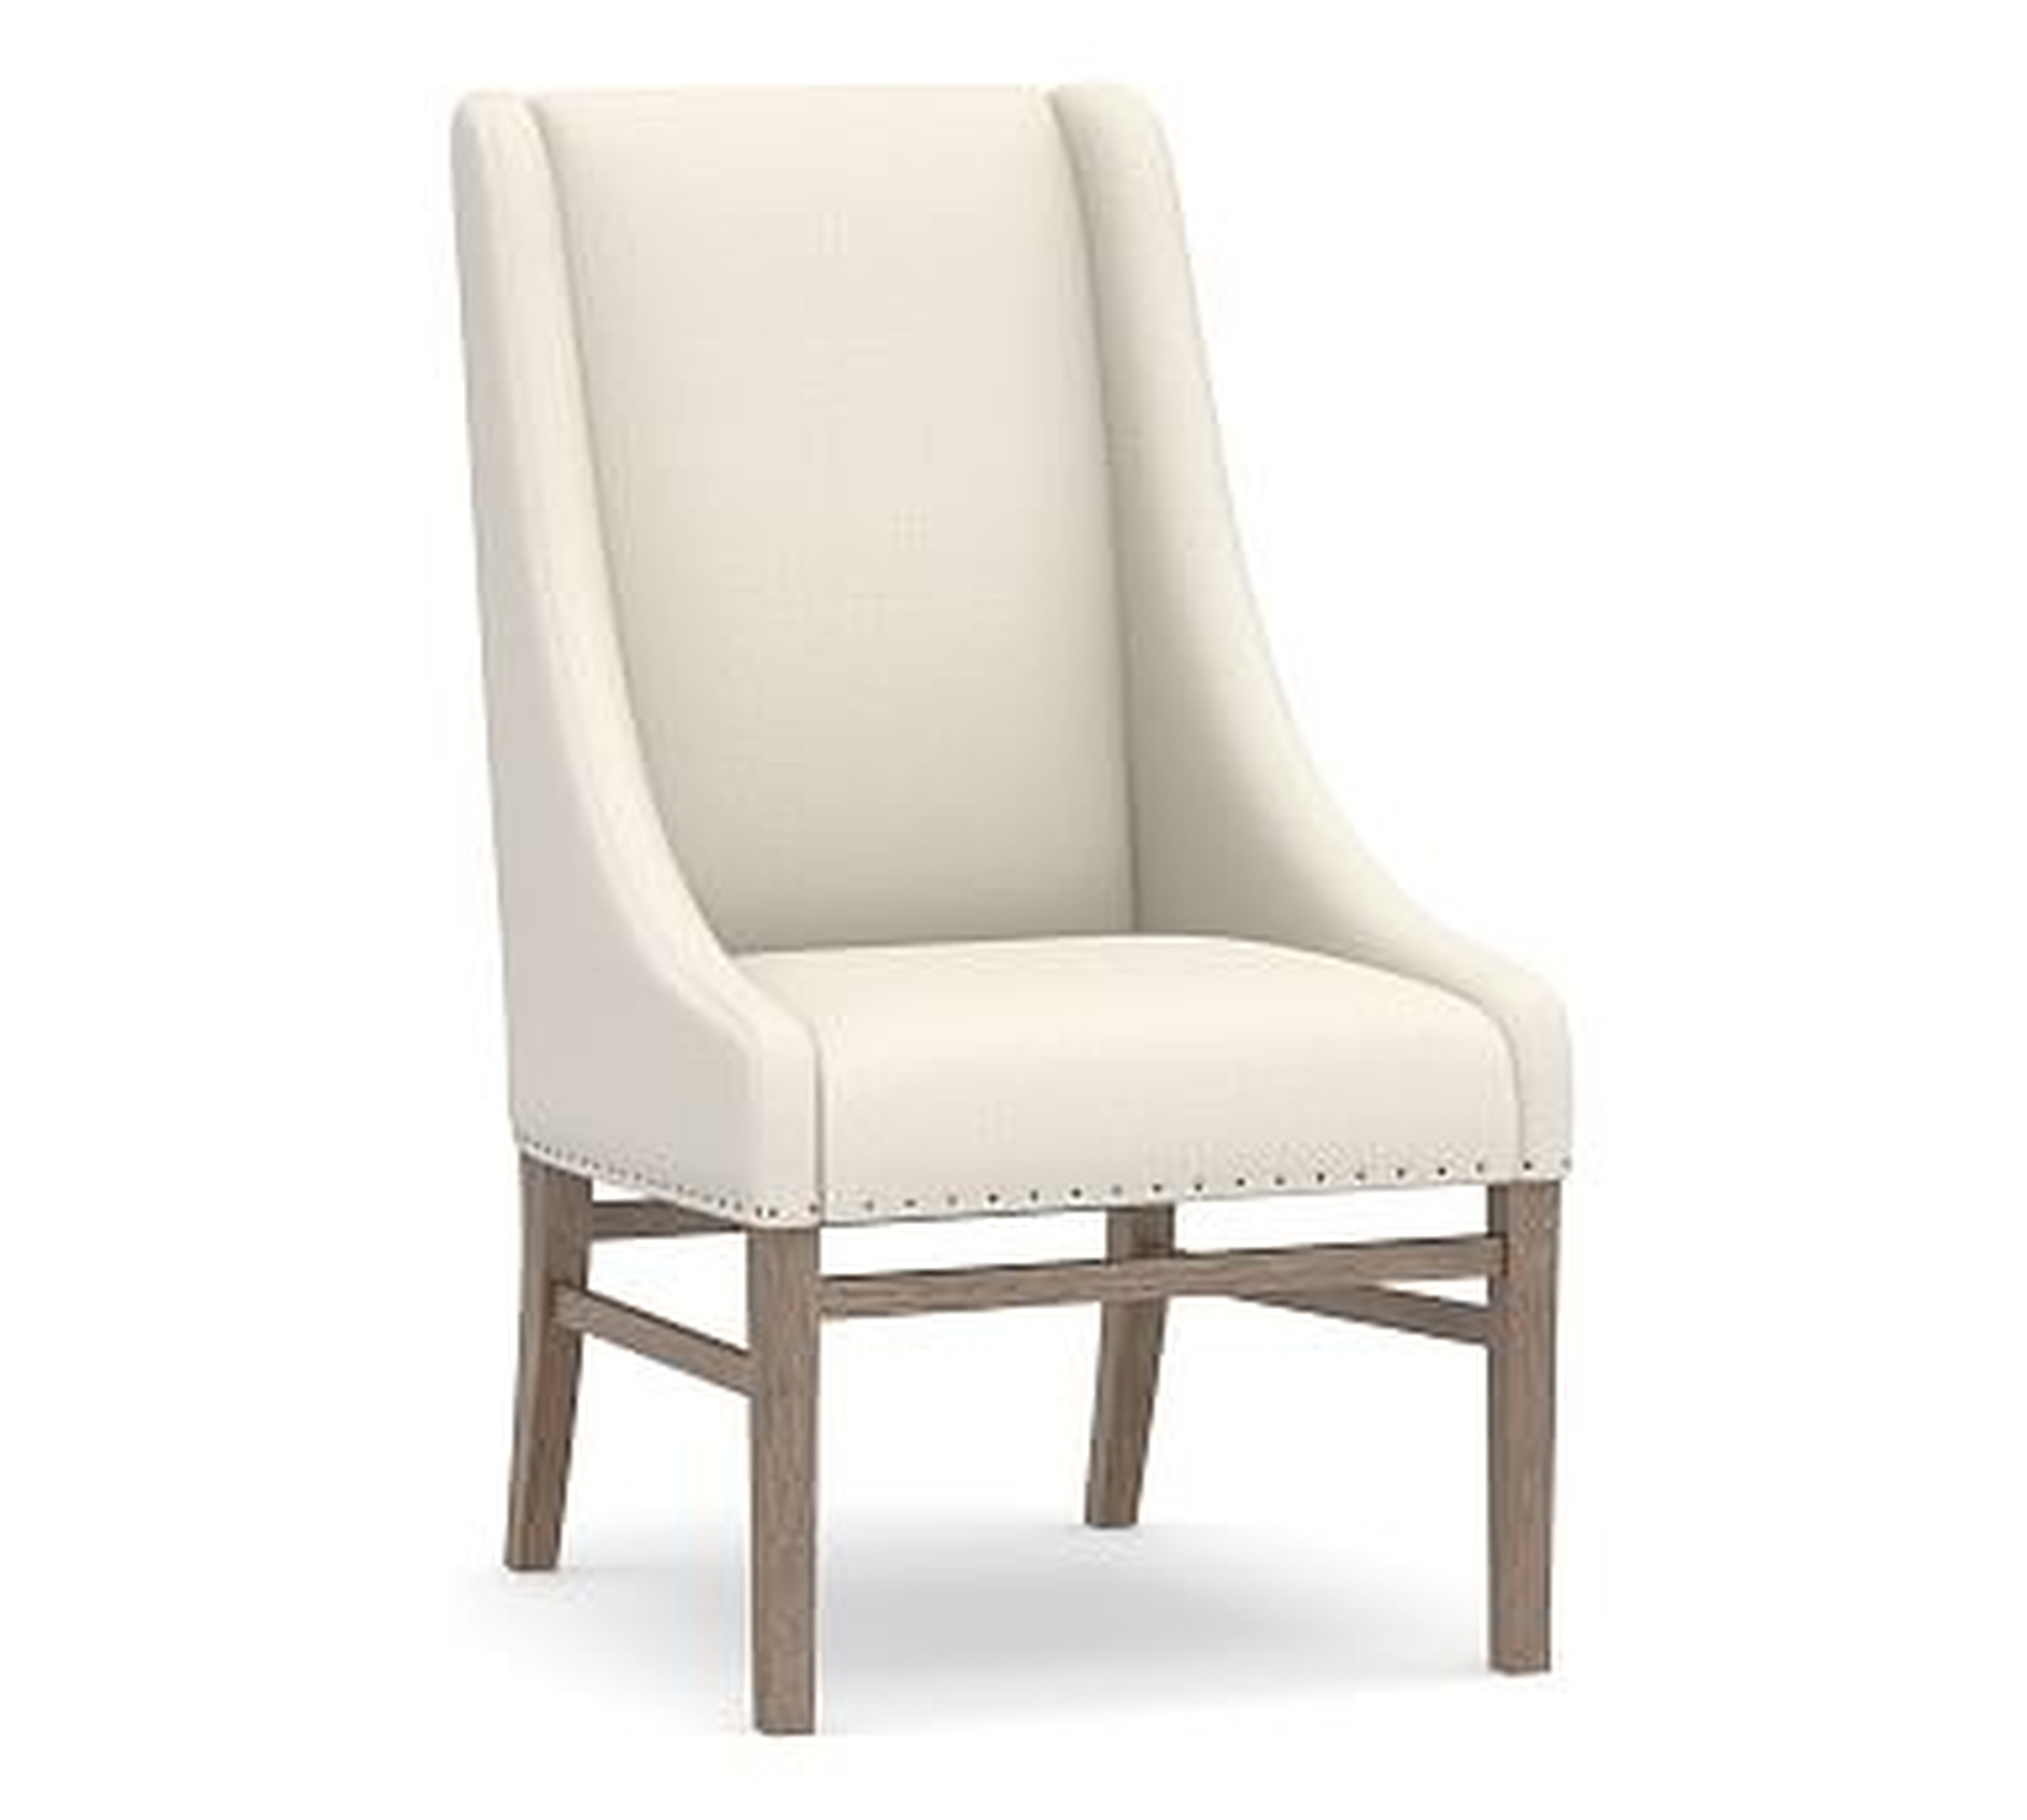 Milan Slope Arm Upholstered Dining Side Chair, Gray Wash Leg, Performance Heathered Tweed Ivory - Pottery Barn